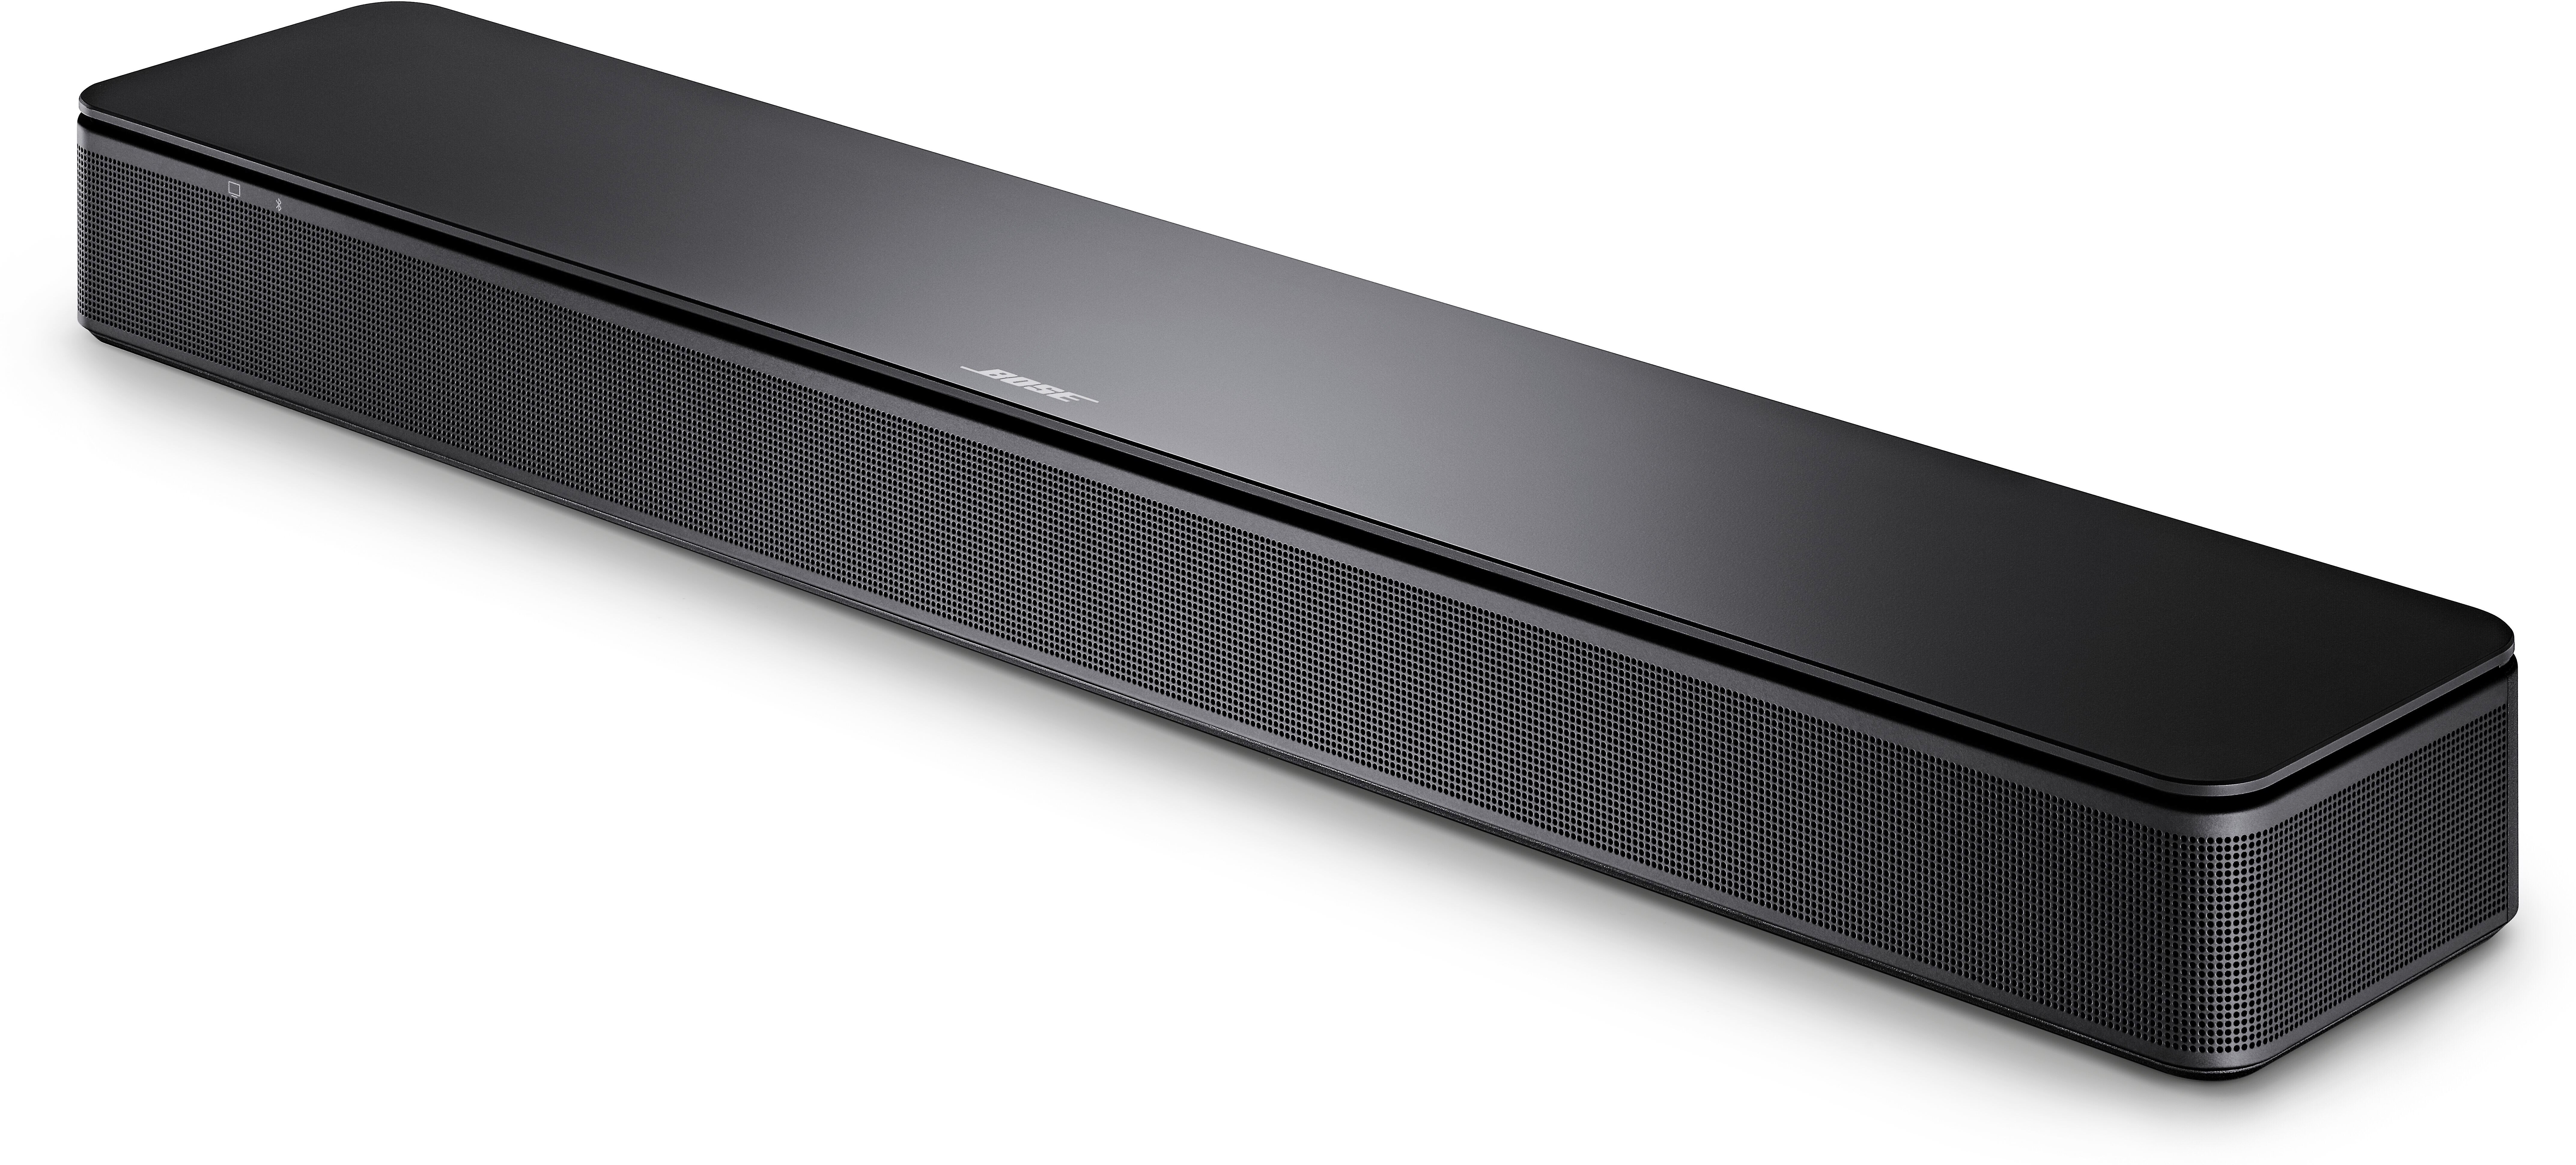 Product Videos: Bose TV Speaker Powered 3-channel sound bar with